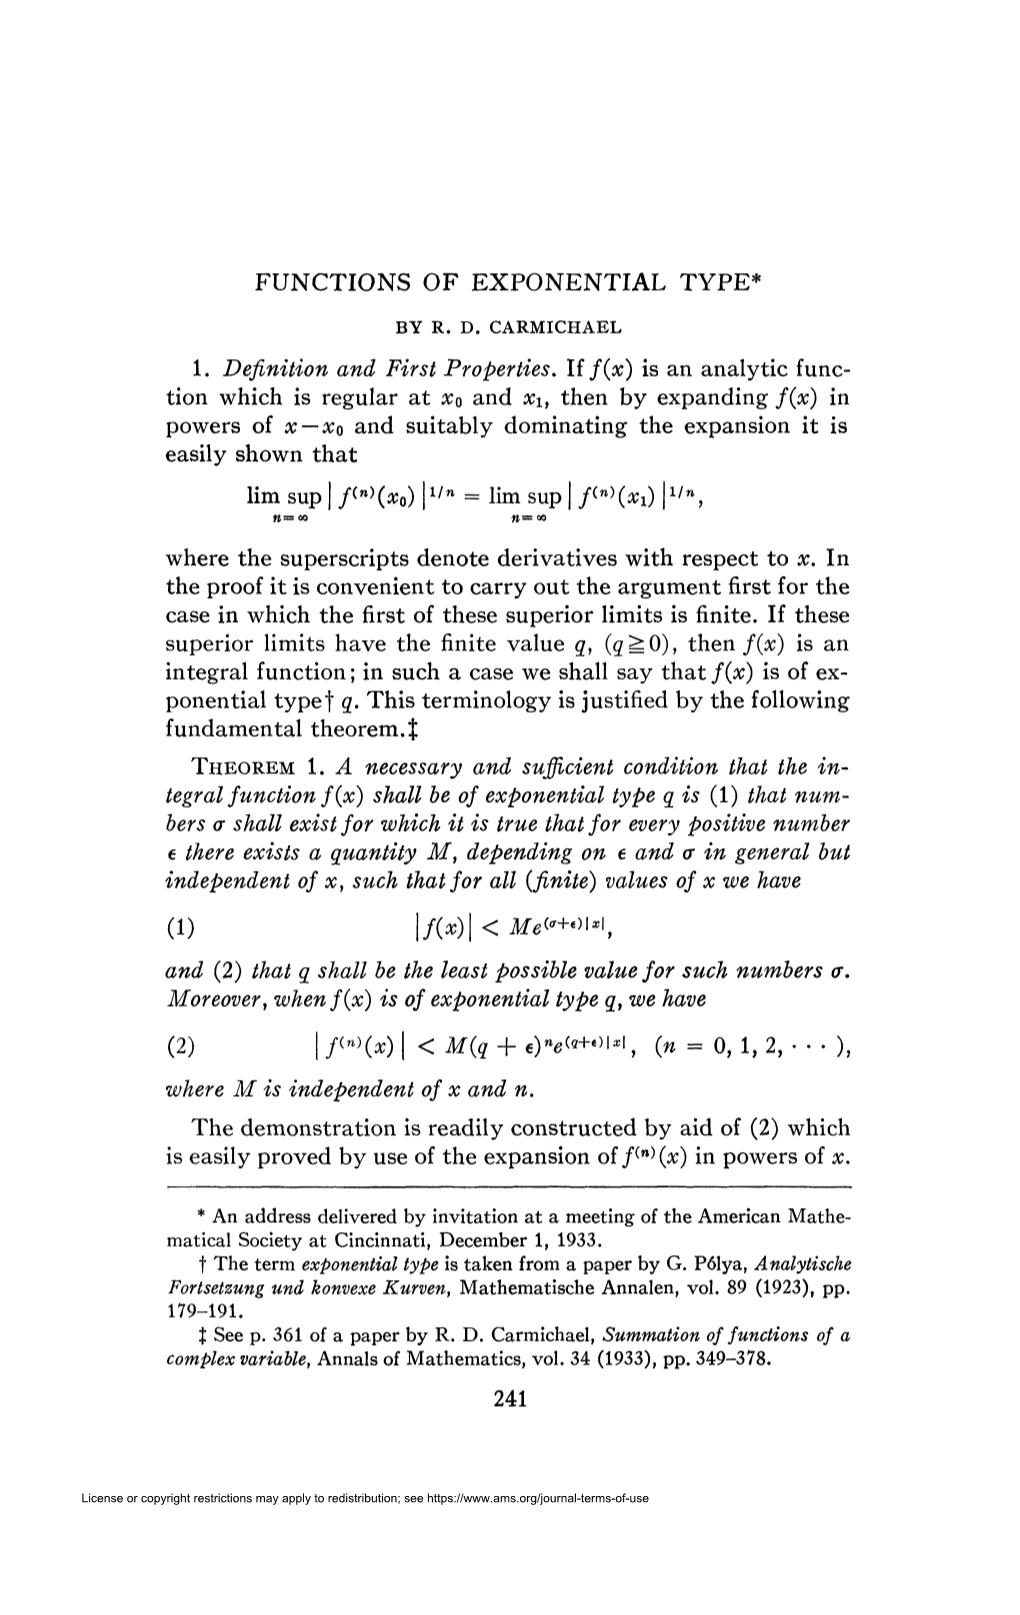 FUNCTIONS of EXPONENTIAL TYPE* 1. Definition and First